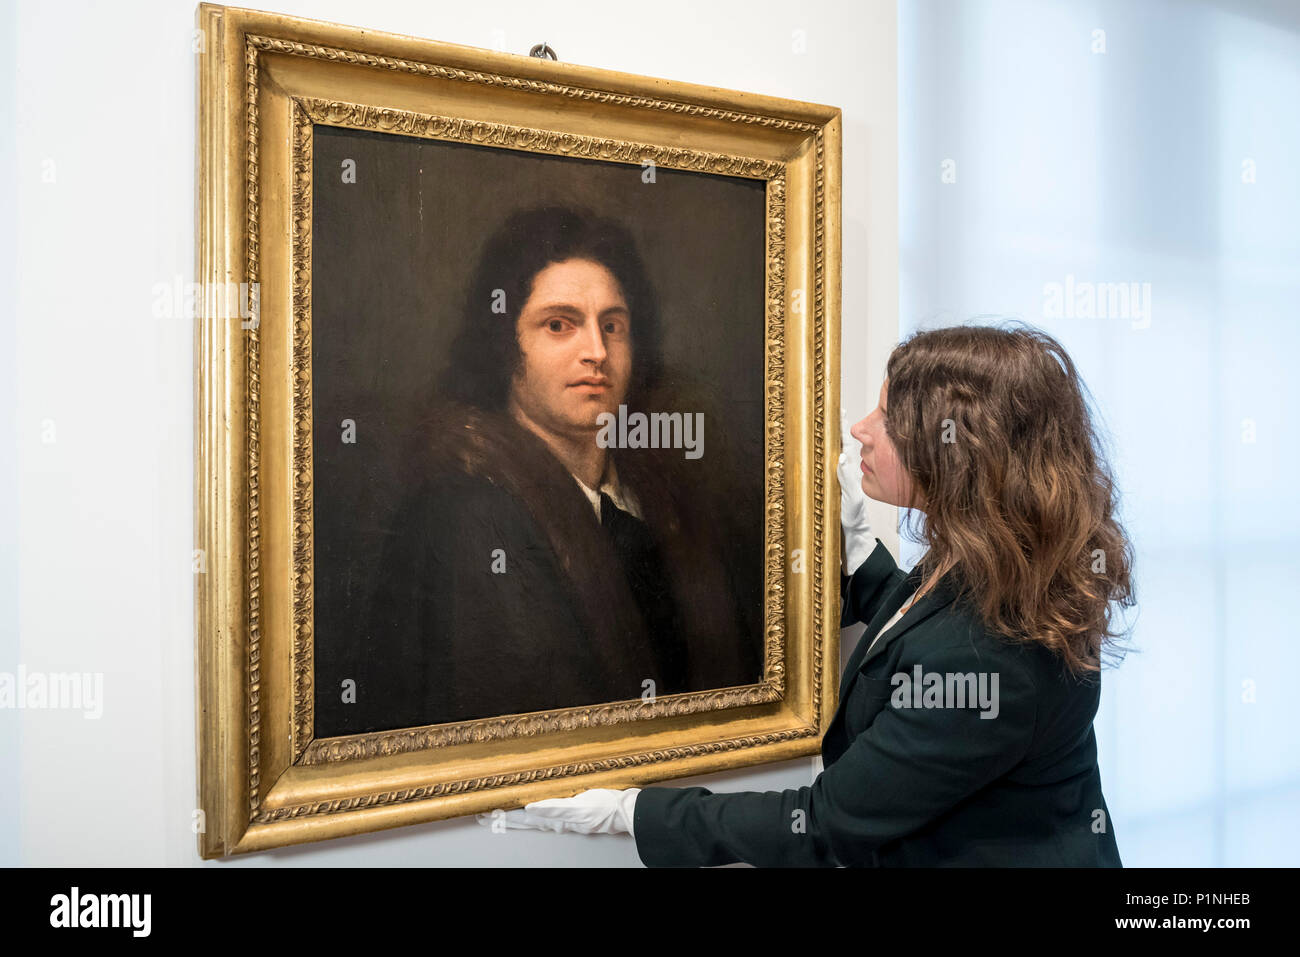 London, UK.  13 June 2018.  Amelia Higgins of London Art Week presents 'Self-Portrait of Giorgione', 1792, by Antonio Canova,  (est. £1m).  More known as the sculptor of V&A's 'The Three Graces', Canova's rediscovered painting, was made to fool fellow Roman artists into believing that it was an original self-portrait by Giorgione.  It is on public view for the first time since being painted at M&L Fine Art gallery, Old Bond Street, during London Art Week, with 40 galleries St James's and Mayfair taking part, 28 June to 6 July 2018.  Credit: Stephen Chung / Alamy Live News Stock Photo